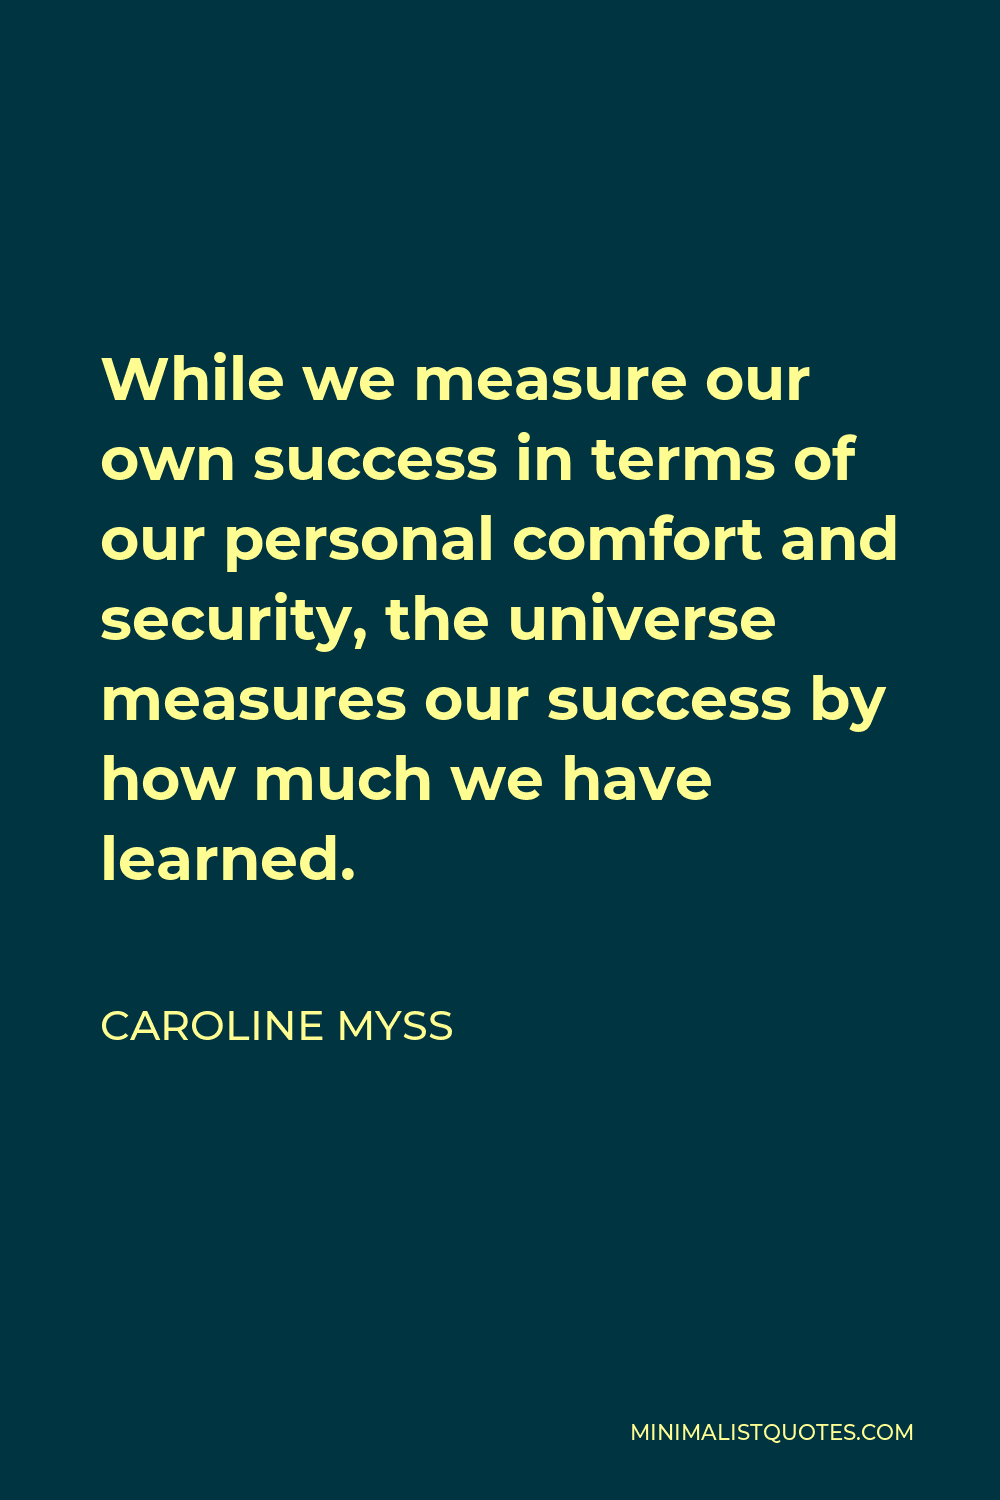 Caroline Myss Quote - While we measure our own success in terms of our personal comfort and security, the universe measures our success by how much we have learned.